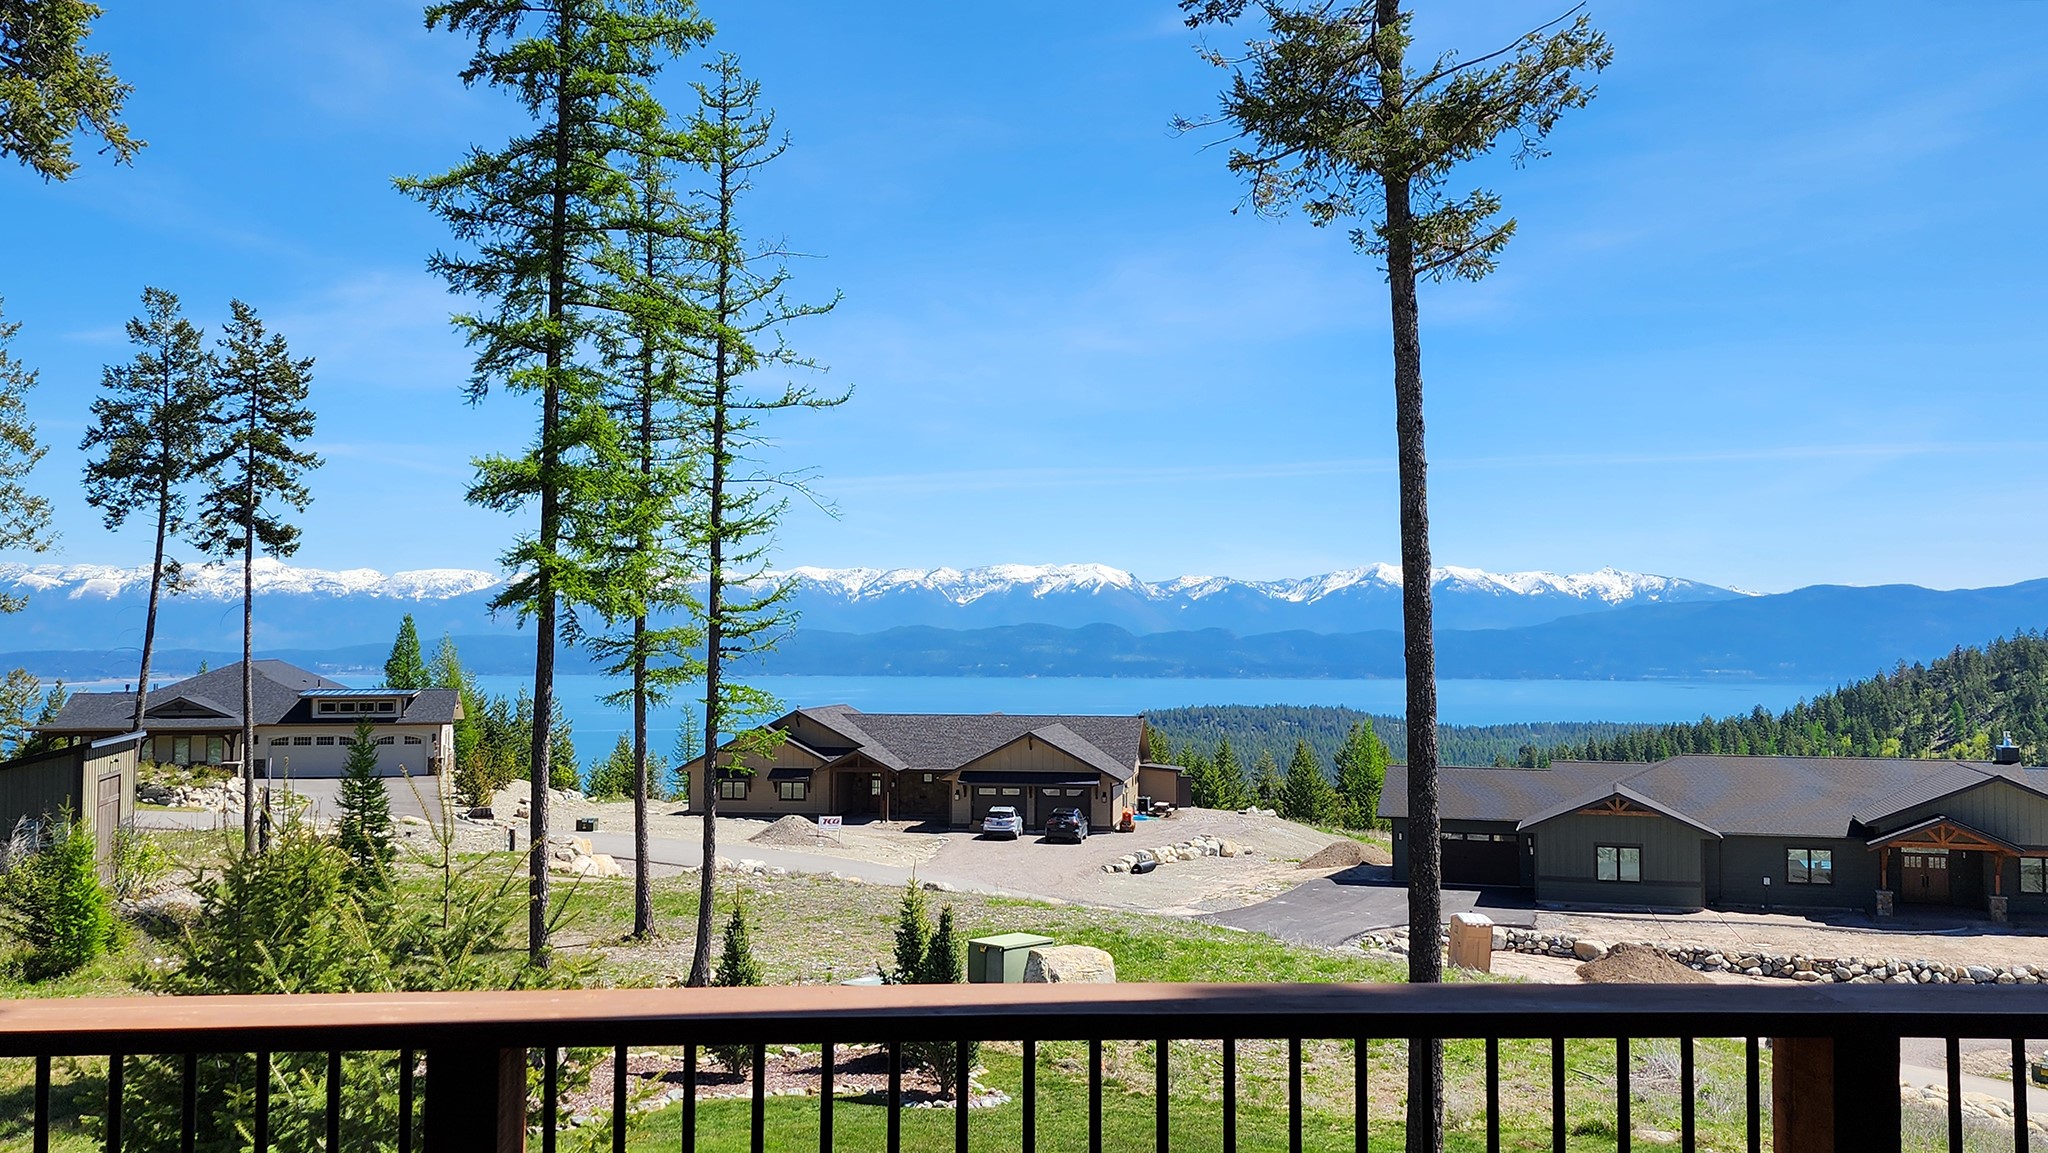 Remarks: Modern appeal to this spacious home overlooking Flathead Lake in the Lakeside Club gated neighborhood. Built in 2016 to take in the spectacular elevated views of the lake and mountains this home has extensive windows to let in light and scenery.  Living space is extended with the ample main floor deck and covered shady patio below. East facing you'll bask in beautiful sunrises and enjoy the alpenglow of the Mission Range at sunset. Home is open concept living with 4 suites (2 on main, 1 is full upper floor, 1 lower) plus exercise room & bonus room with attached full bath that could be for overflow guest or office. Dble garage, beautiful landscaping. Lakeside Club has paved 3376 ft private airstrip, shared hangers.  scenic 9 min drive to Volunteer Park on Flathead Lake, public boat ramp, grocery and restaurants in Lakeside; an hour to Glacier National Park, 40 minutes to Blacktail Mountain Ski area. Contact Scott Hollinger at 406-253-7268, or your real estate professional.